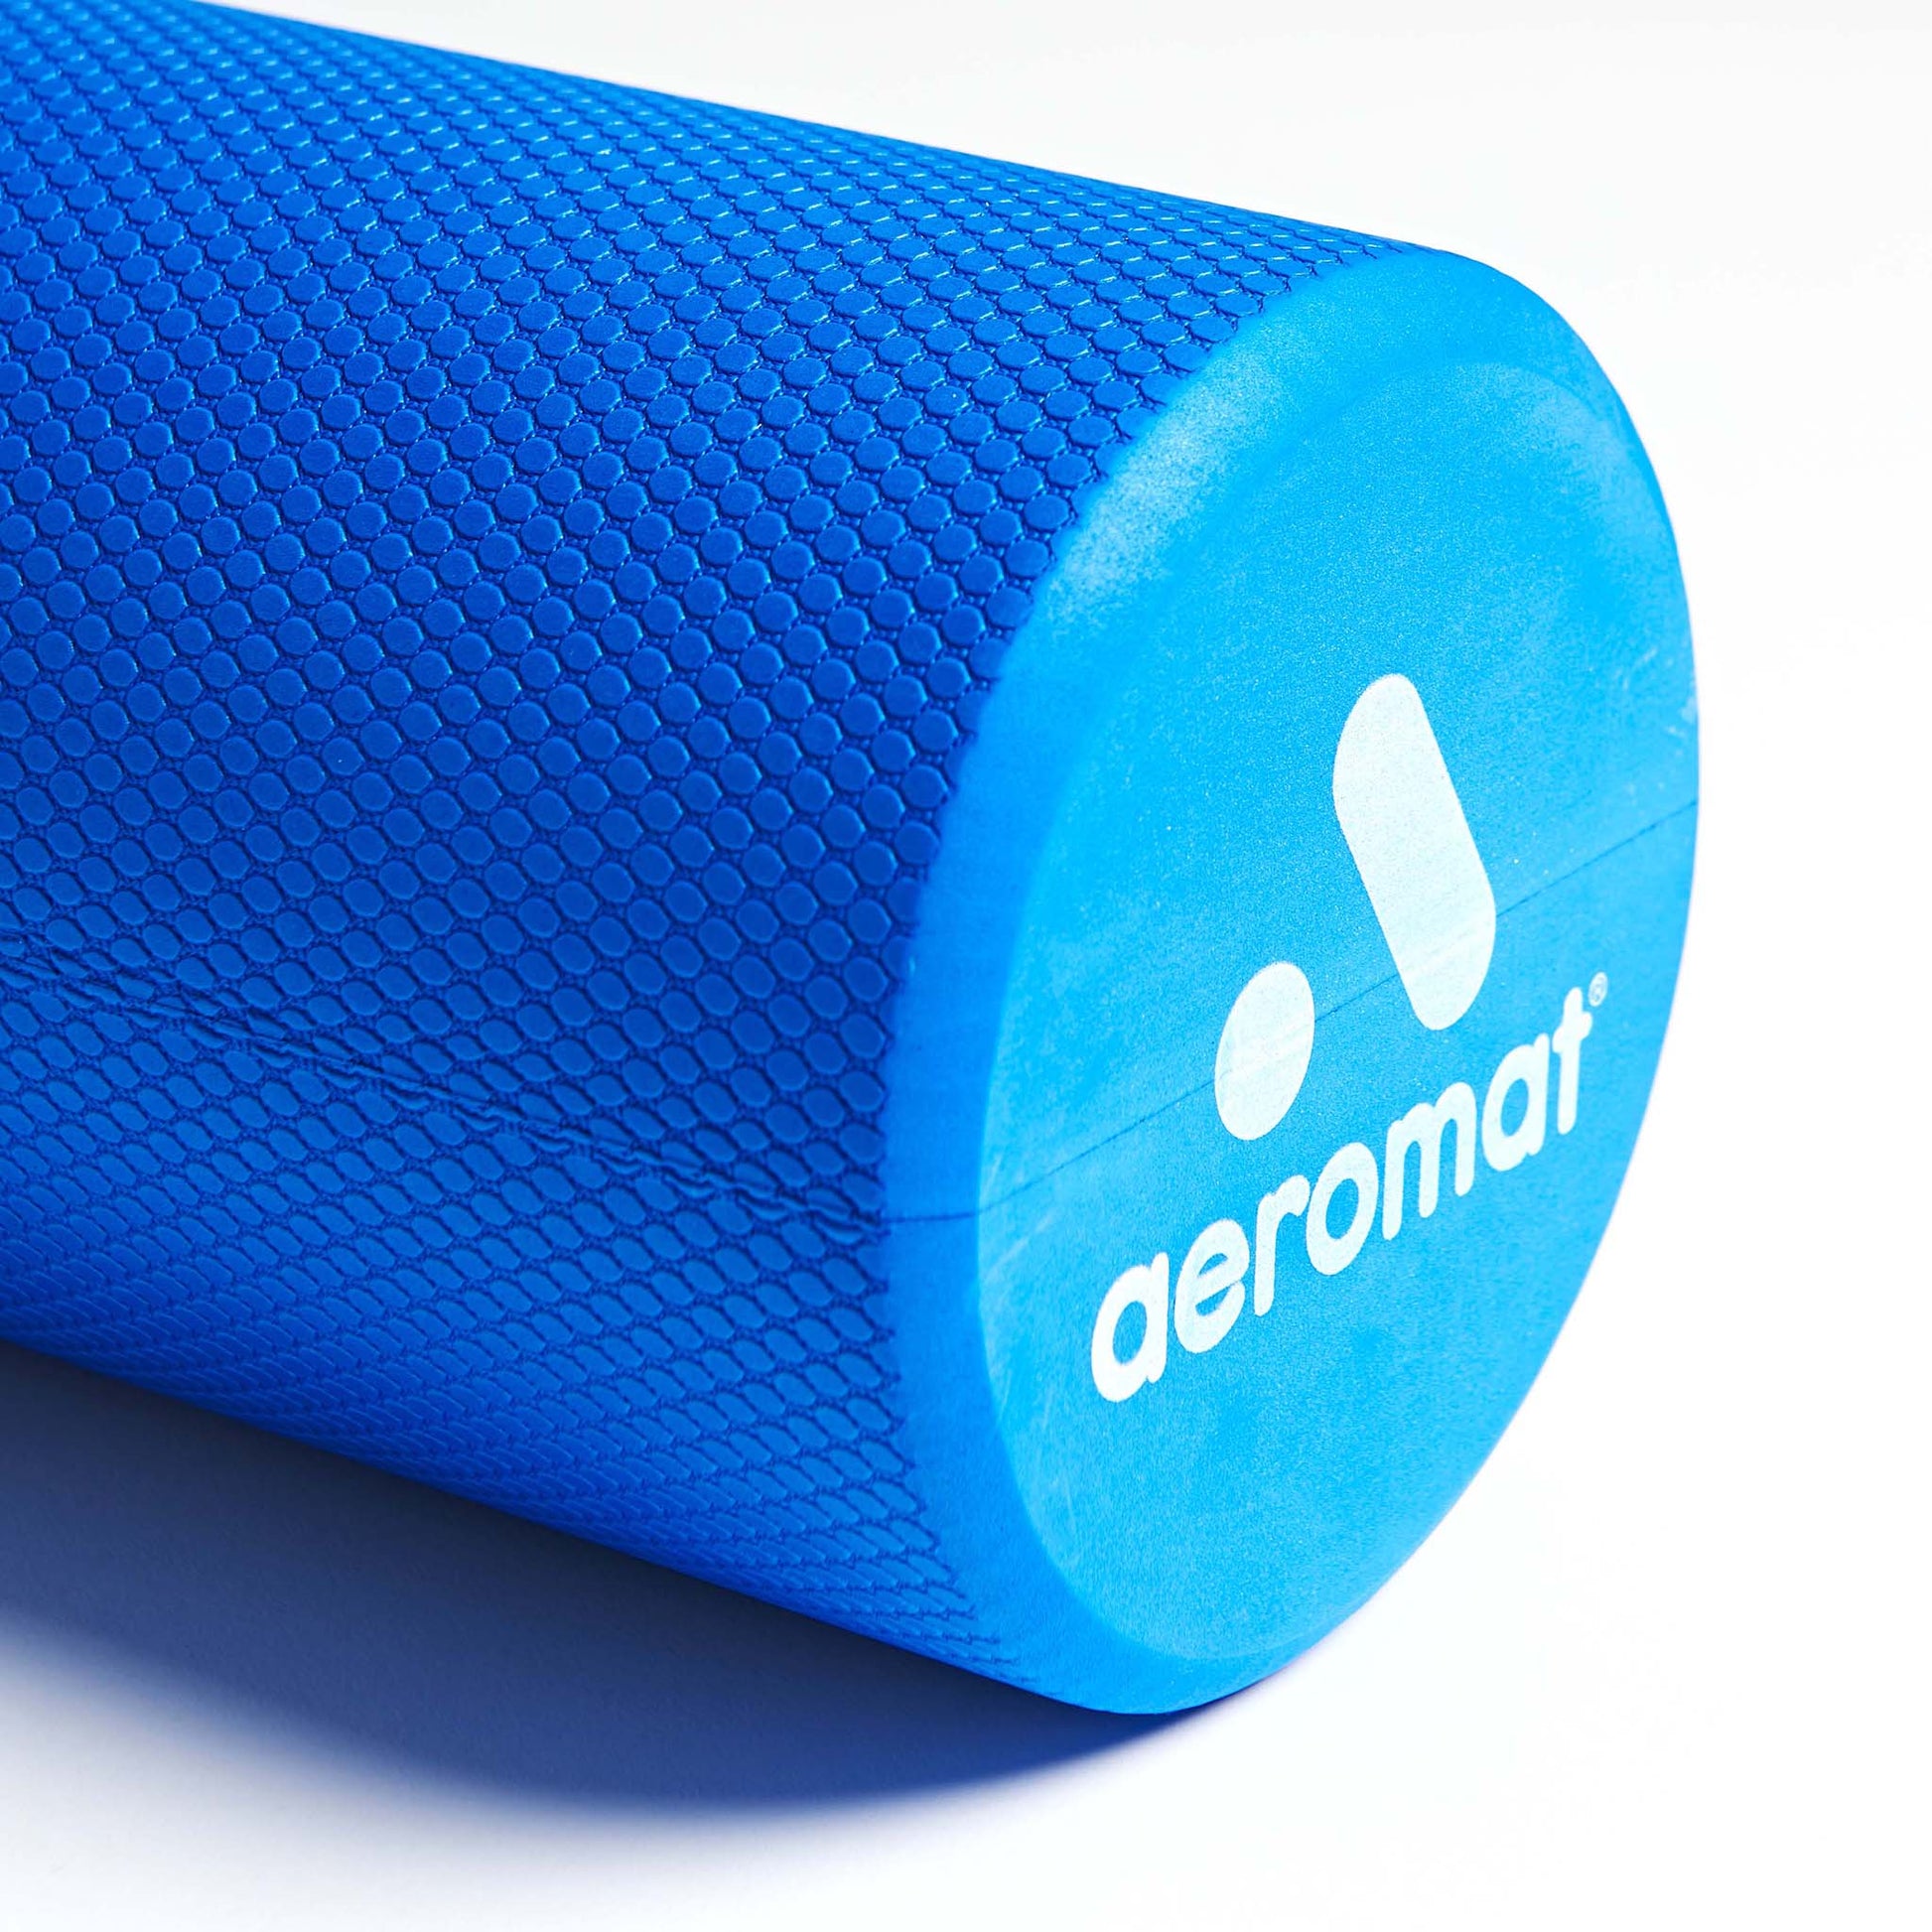 FOAM ROLLER AND BALL – Aeromat/Ecowise